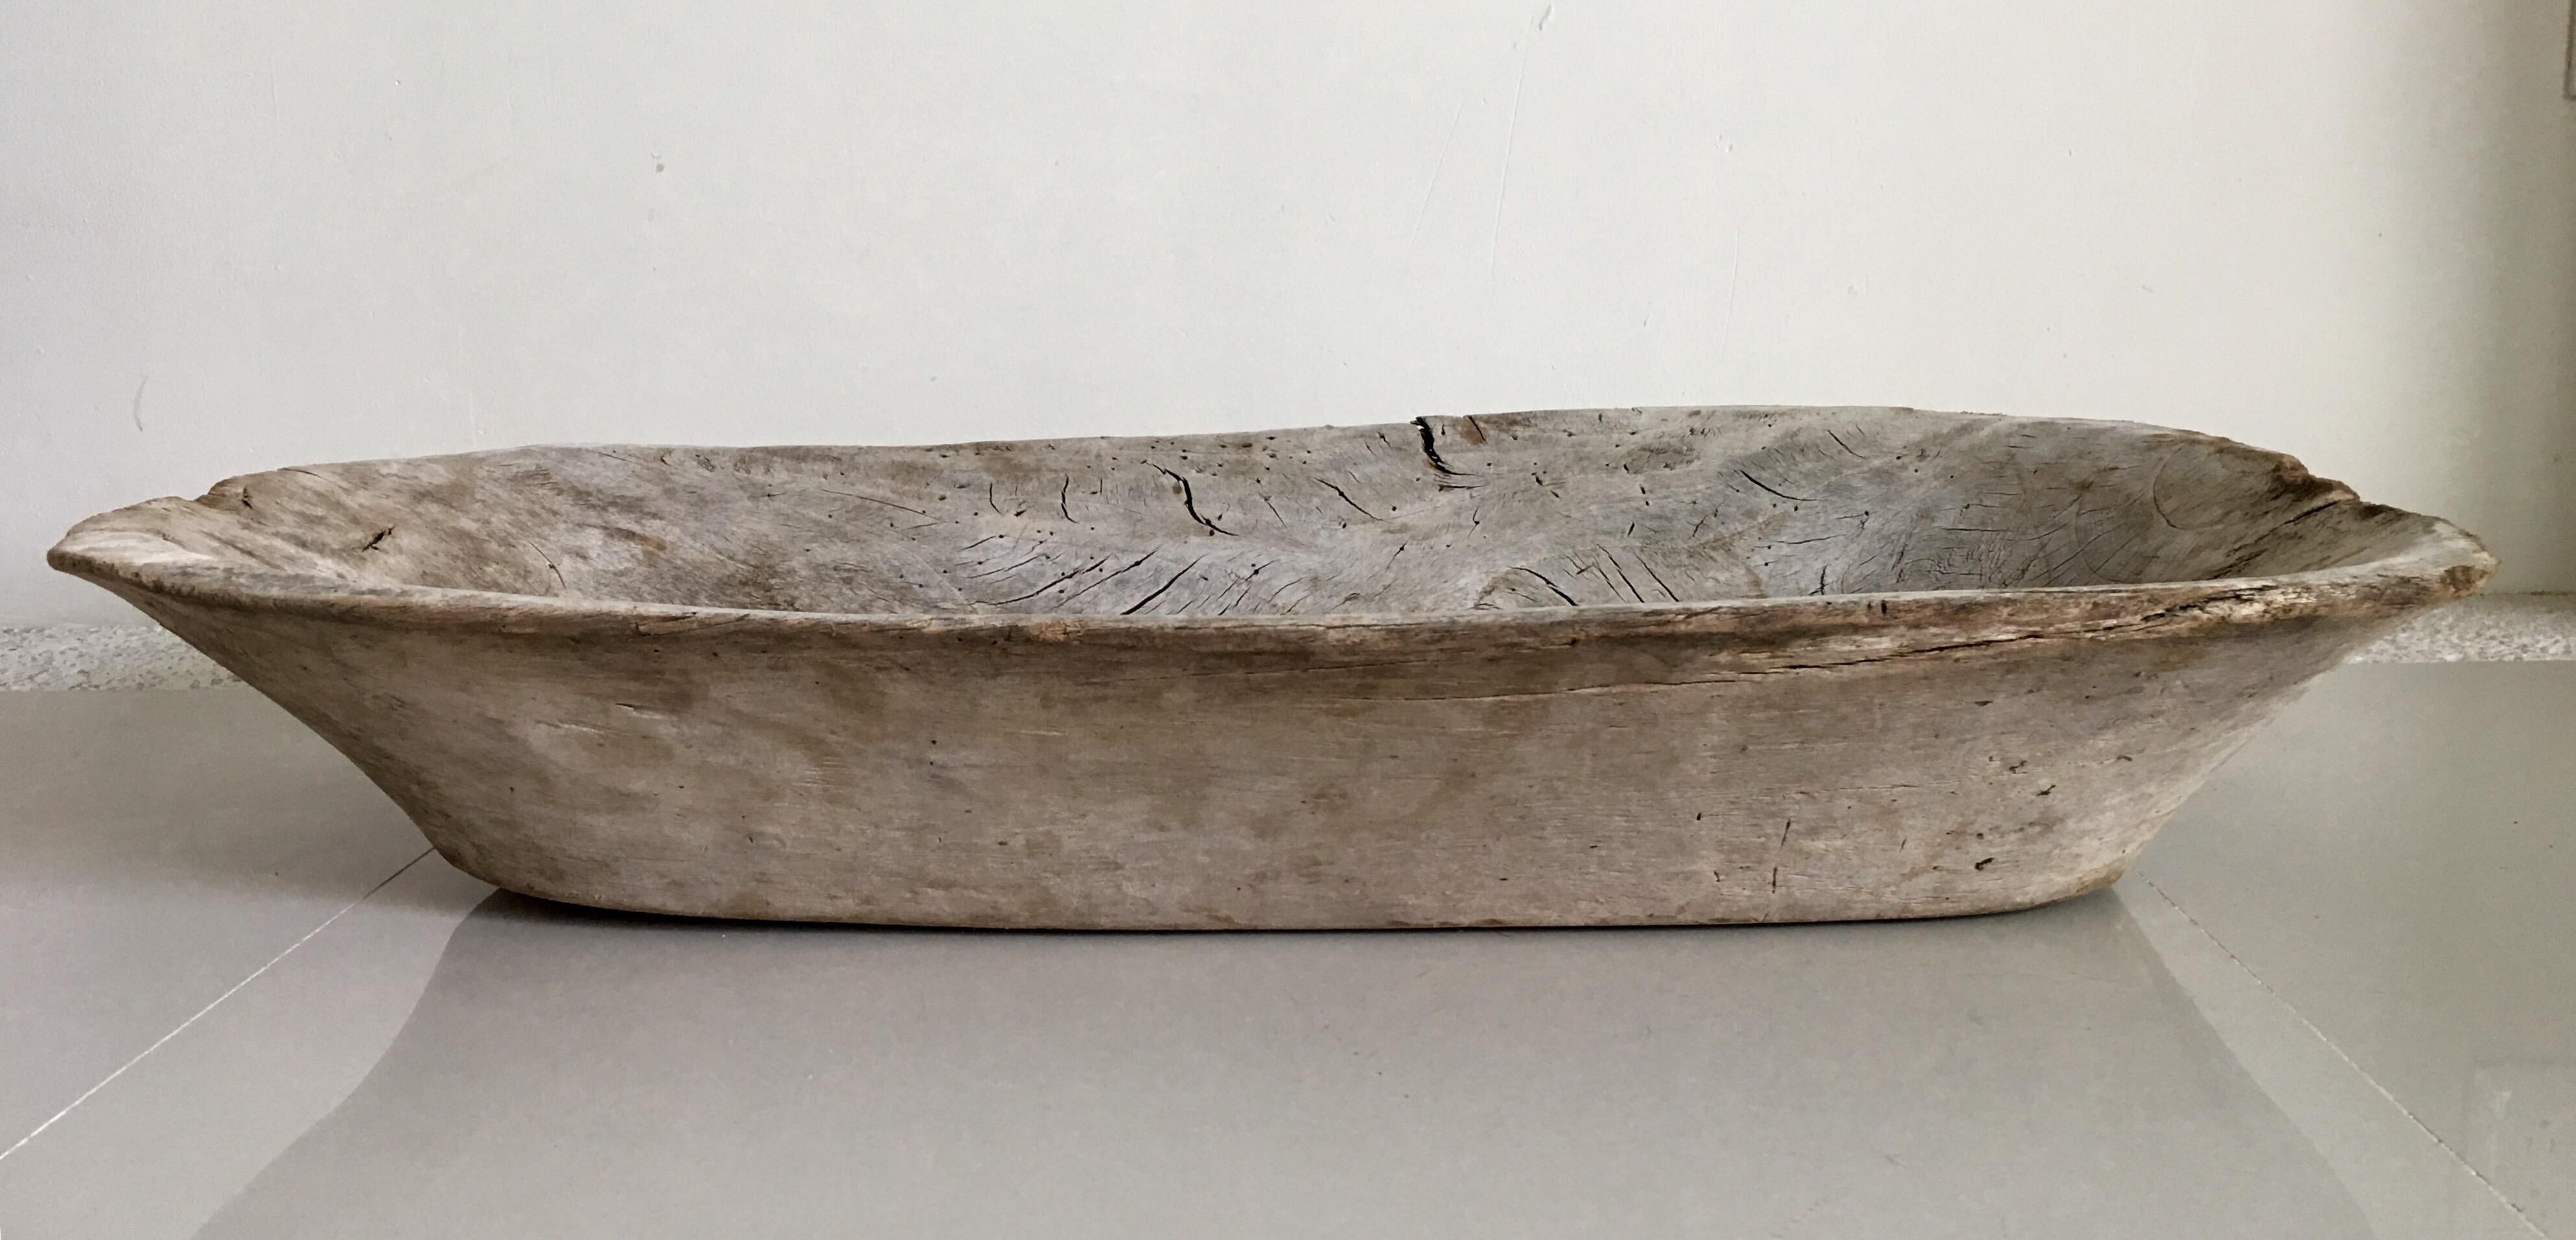 Hand carved cedar trough basin from the Huasteca region of central Mexico. Used for agricultural purposes to collect vegetables or grains. Nice for home accessories, wall features or fruit bowls. Good silver sheen from years of being in the sun.